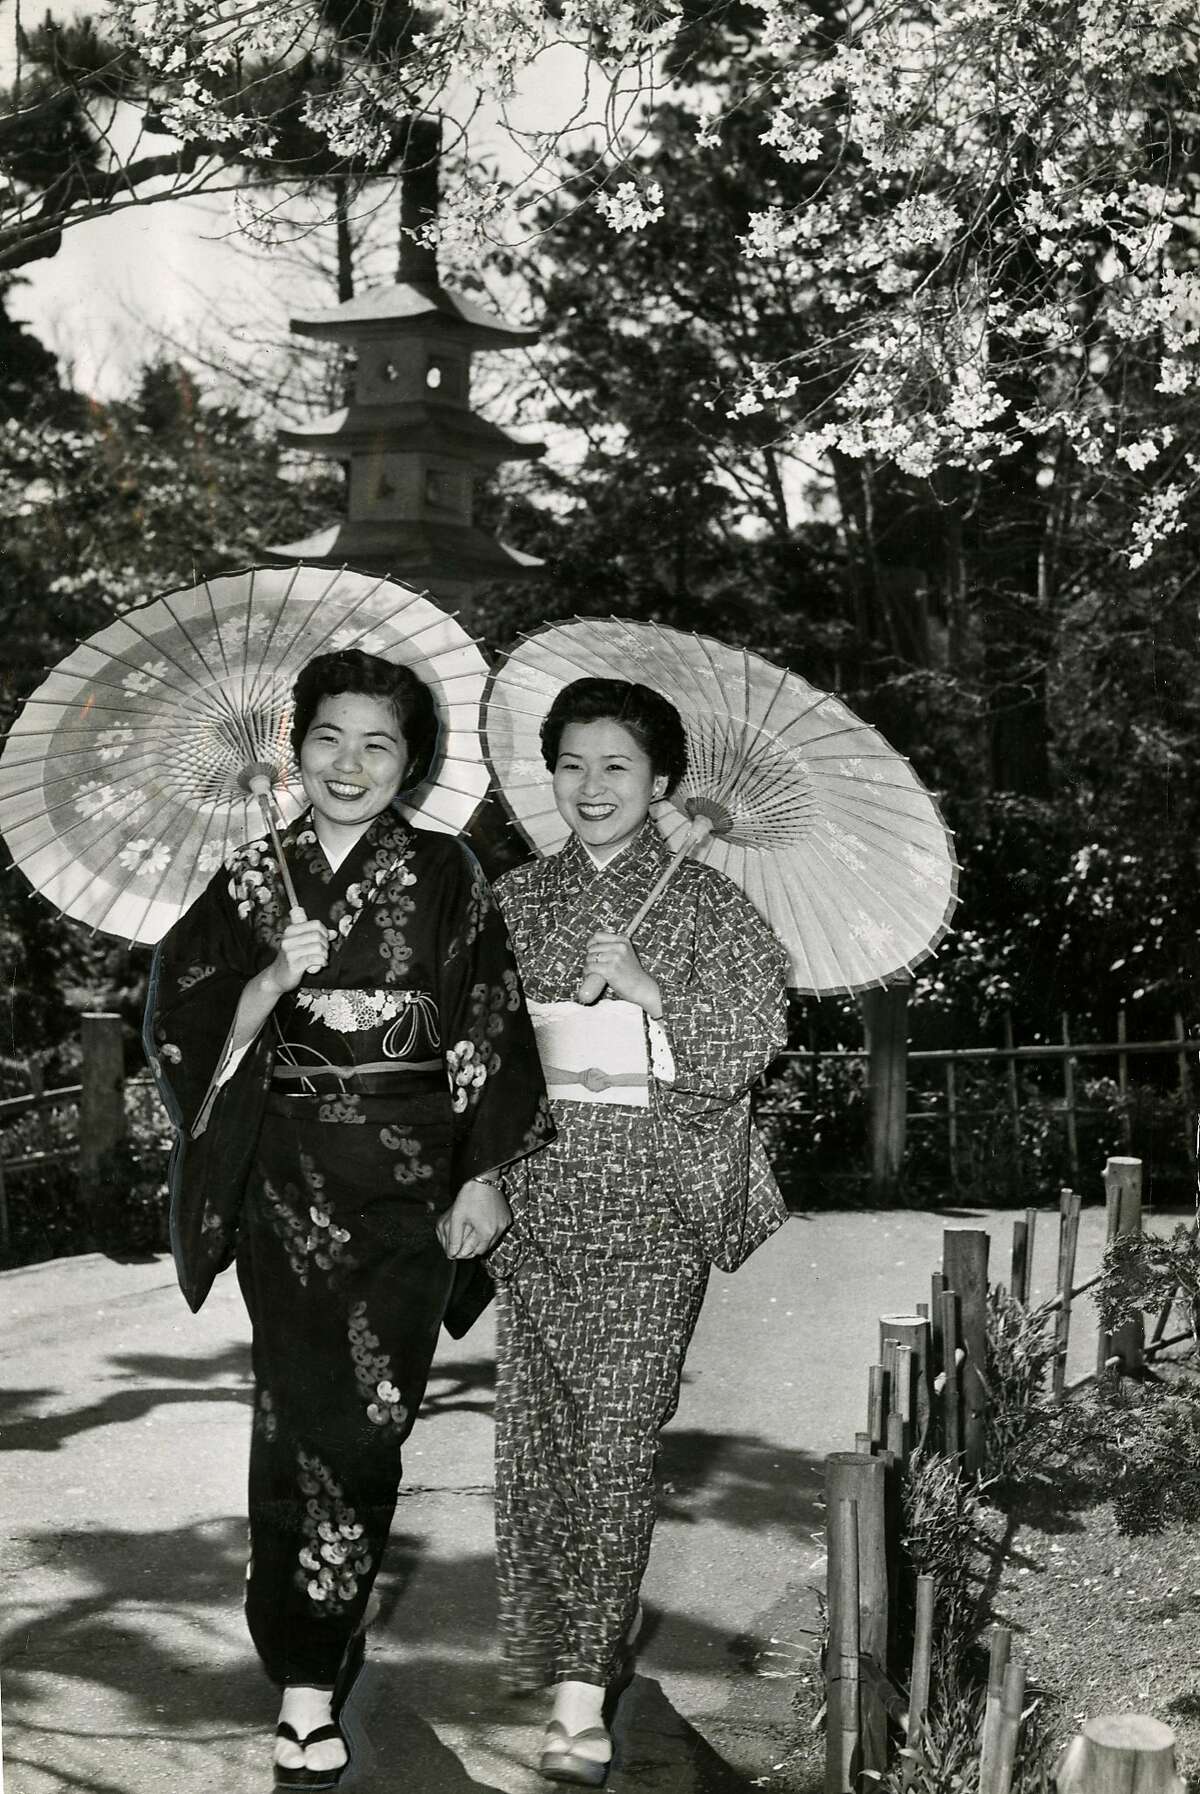 San Francisco Golden Gate Park Japanese Tea Garden. Cherry blossom time. Sayoko Lombard, left, and Fusae Fleming, members of the garden staff. March 26, 1956